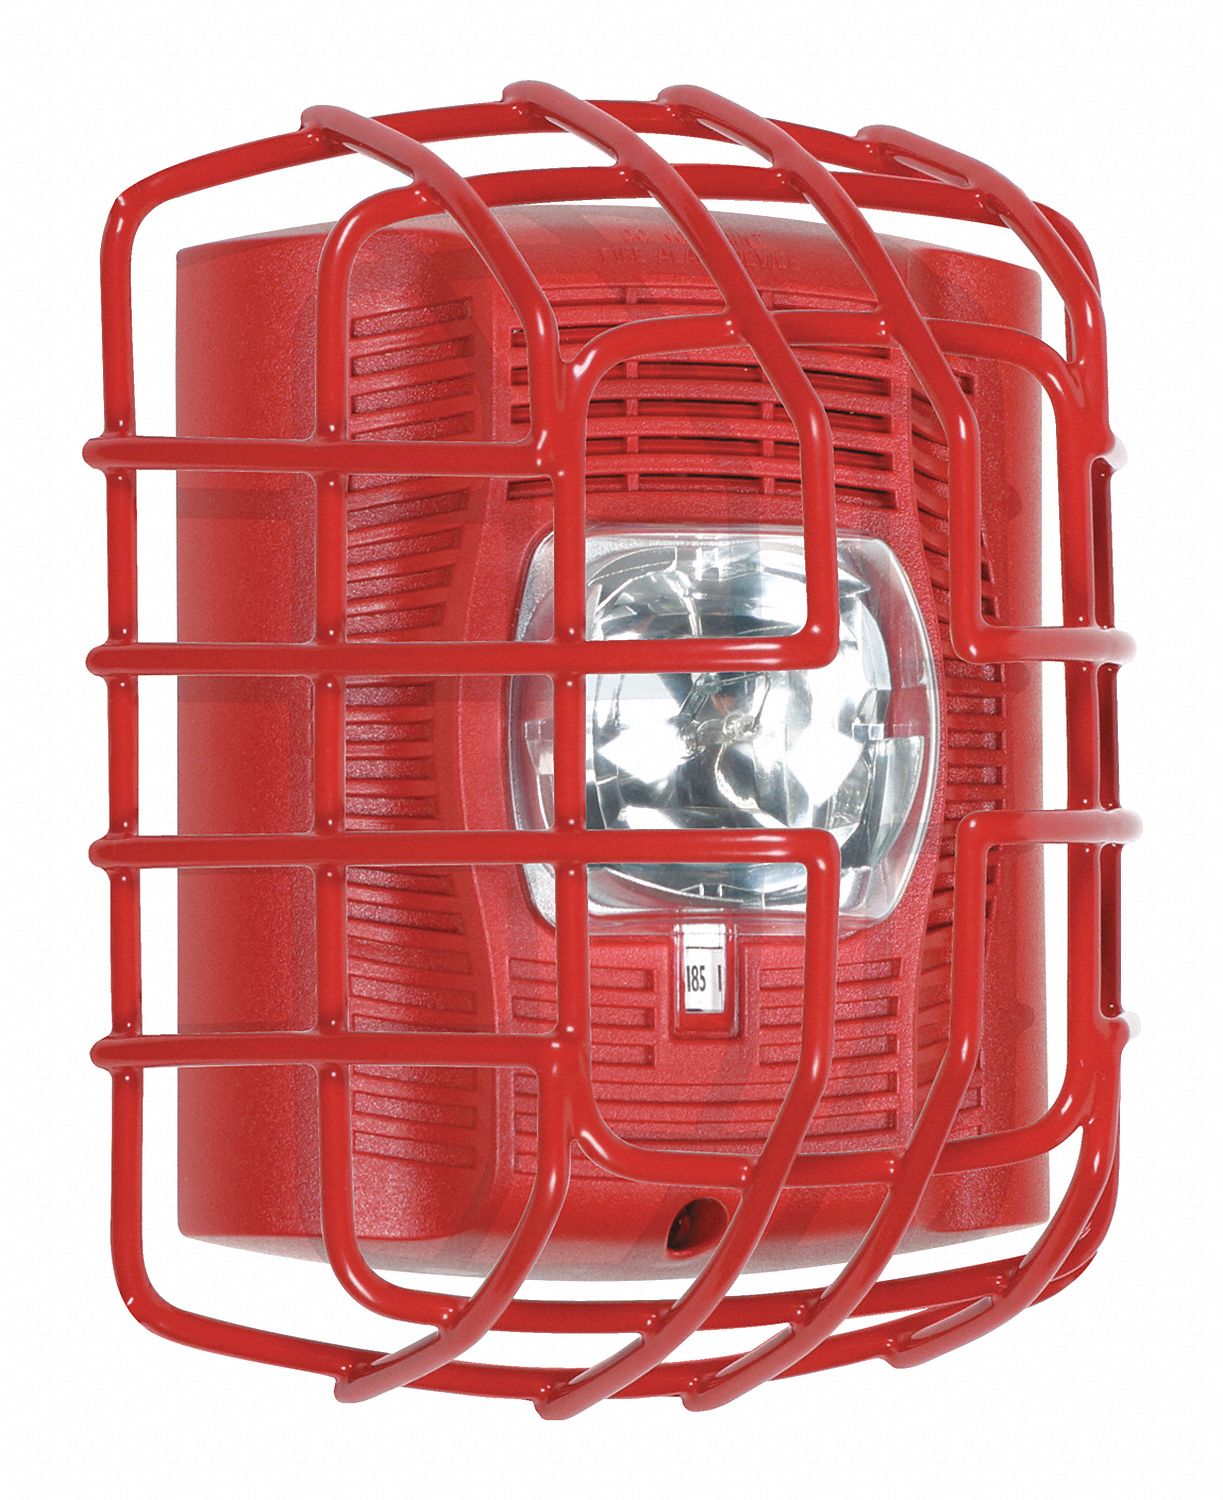 16D842 - 9-ga wire cage protects horn/strobe/spkr